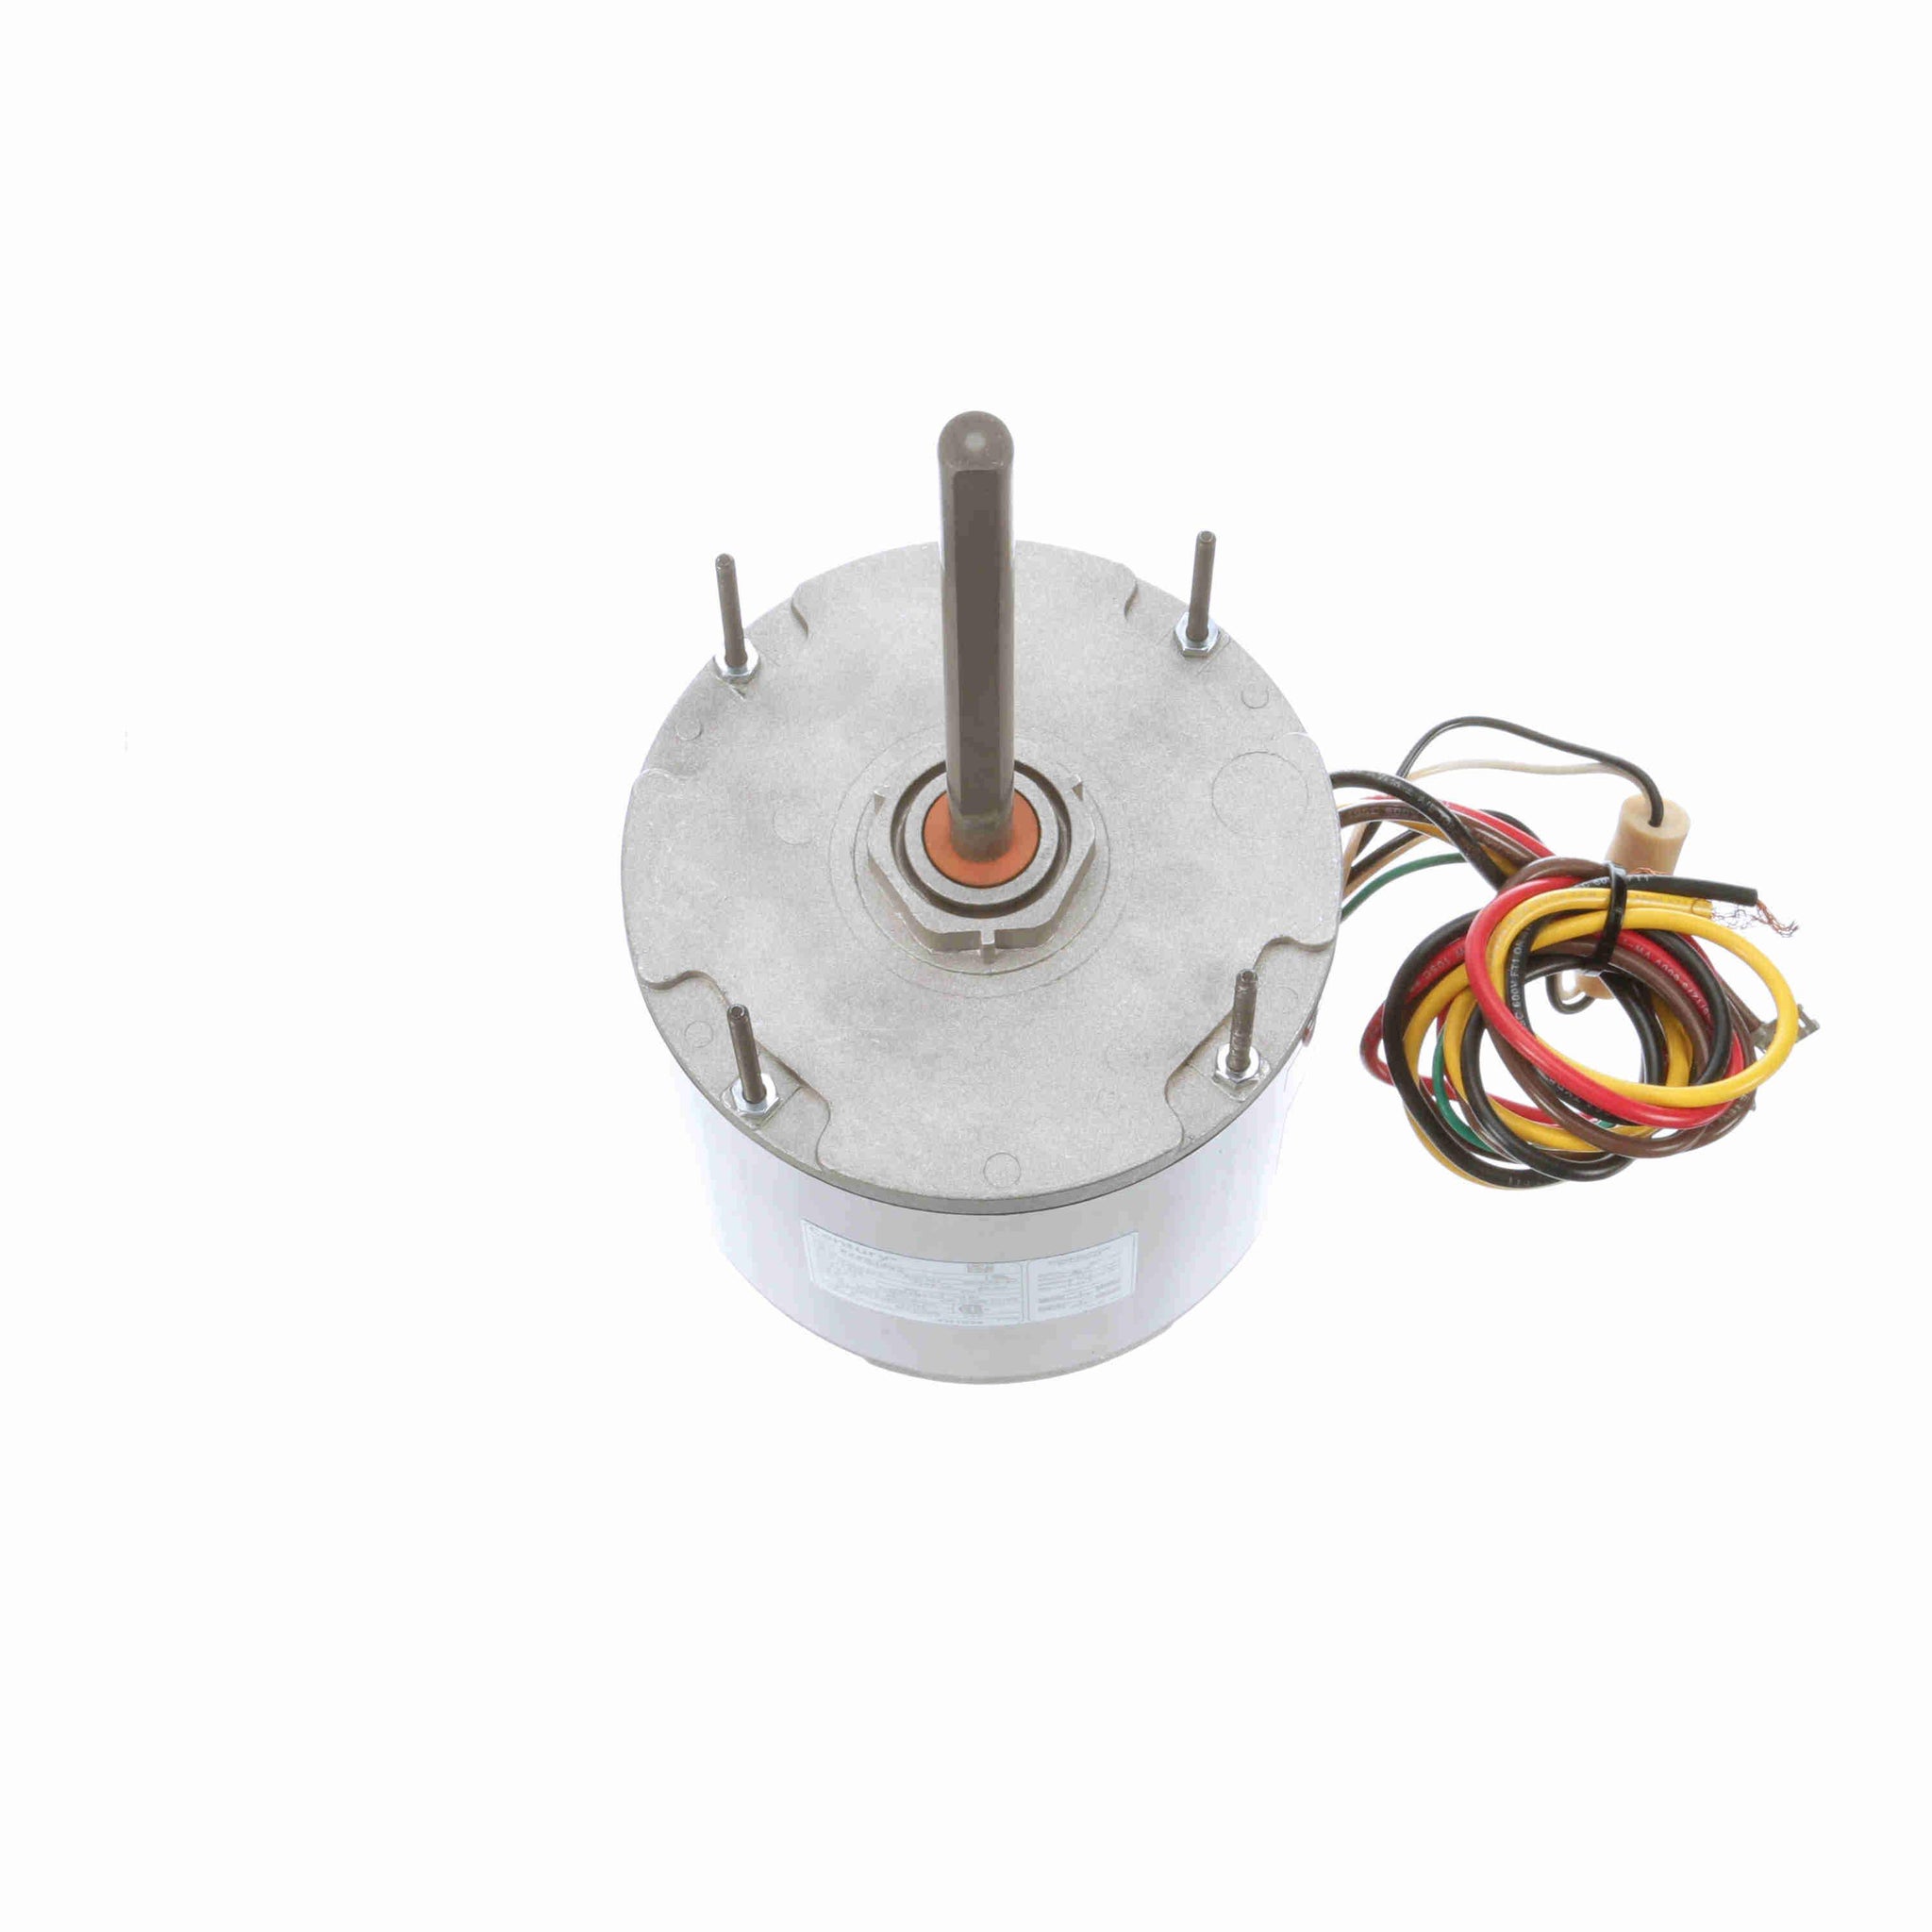 FH1024 - 1/4 HP Condenser Fan Motor, 1625 RPM, 2 Speed, 460 Volts, 48 Frame, Semi Enclosed - Hardware & Moreee